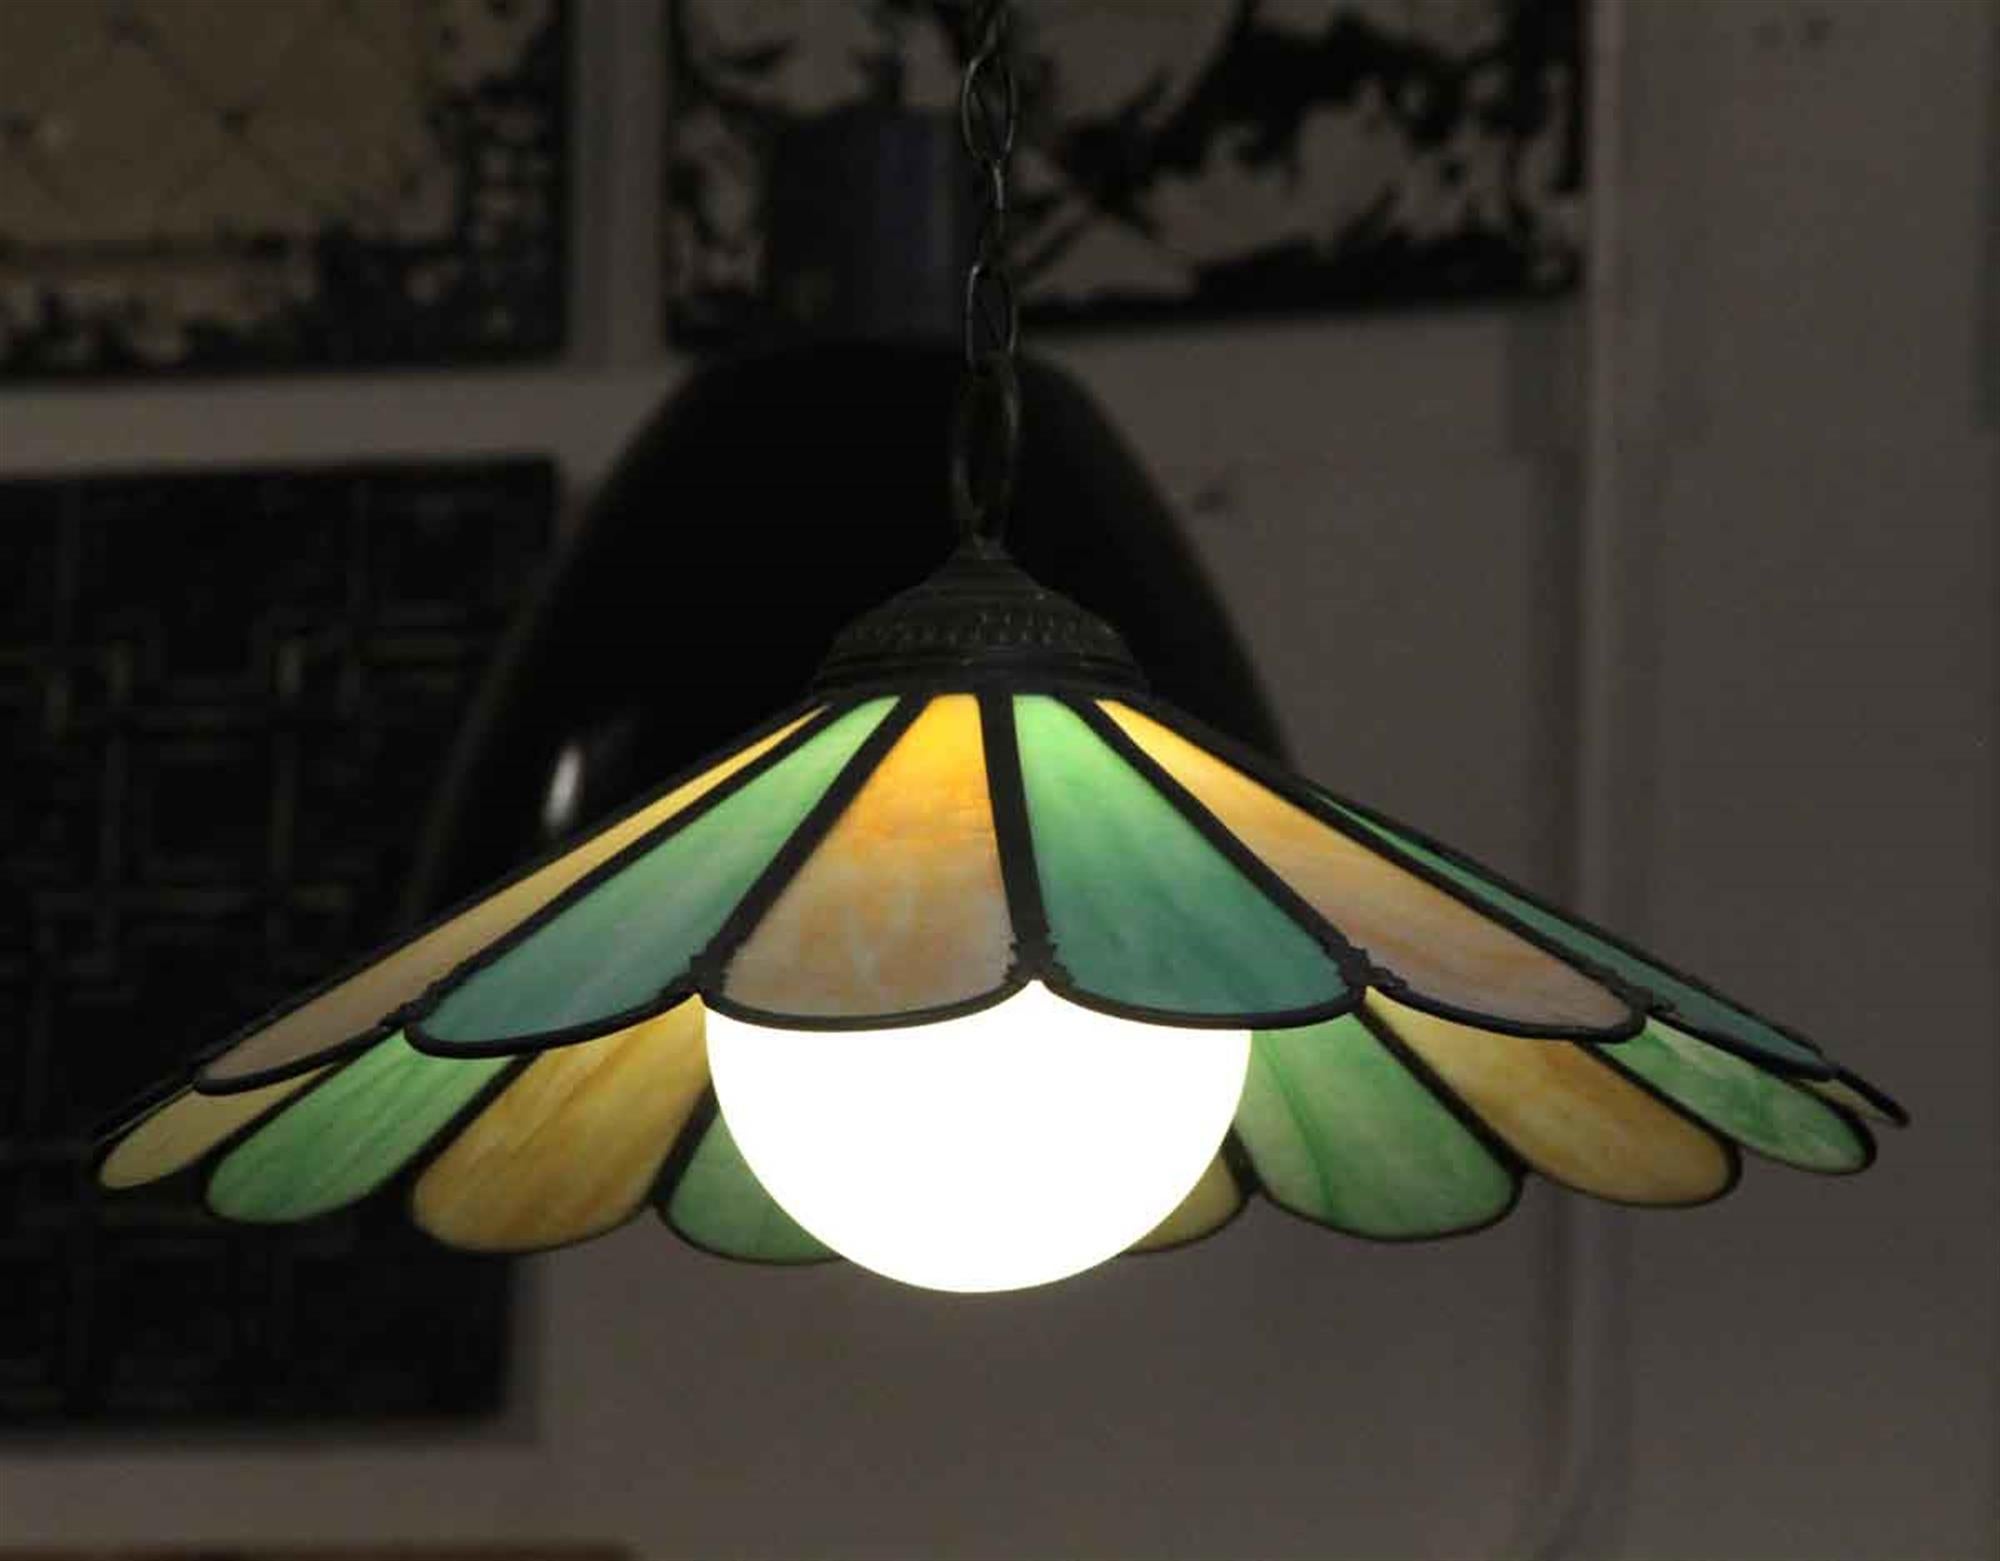 This hanging green and yellow stained glass petal shade is straight from the 1970s psychedelic era! It includes a chain and canopy and is newly wired and ready to go. This can be seen at our 5 East 16th St location on Union Square in Manhattan.